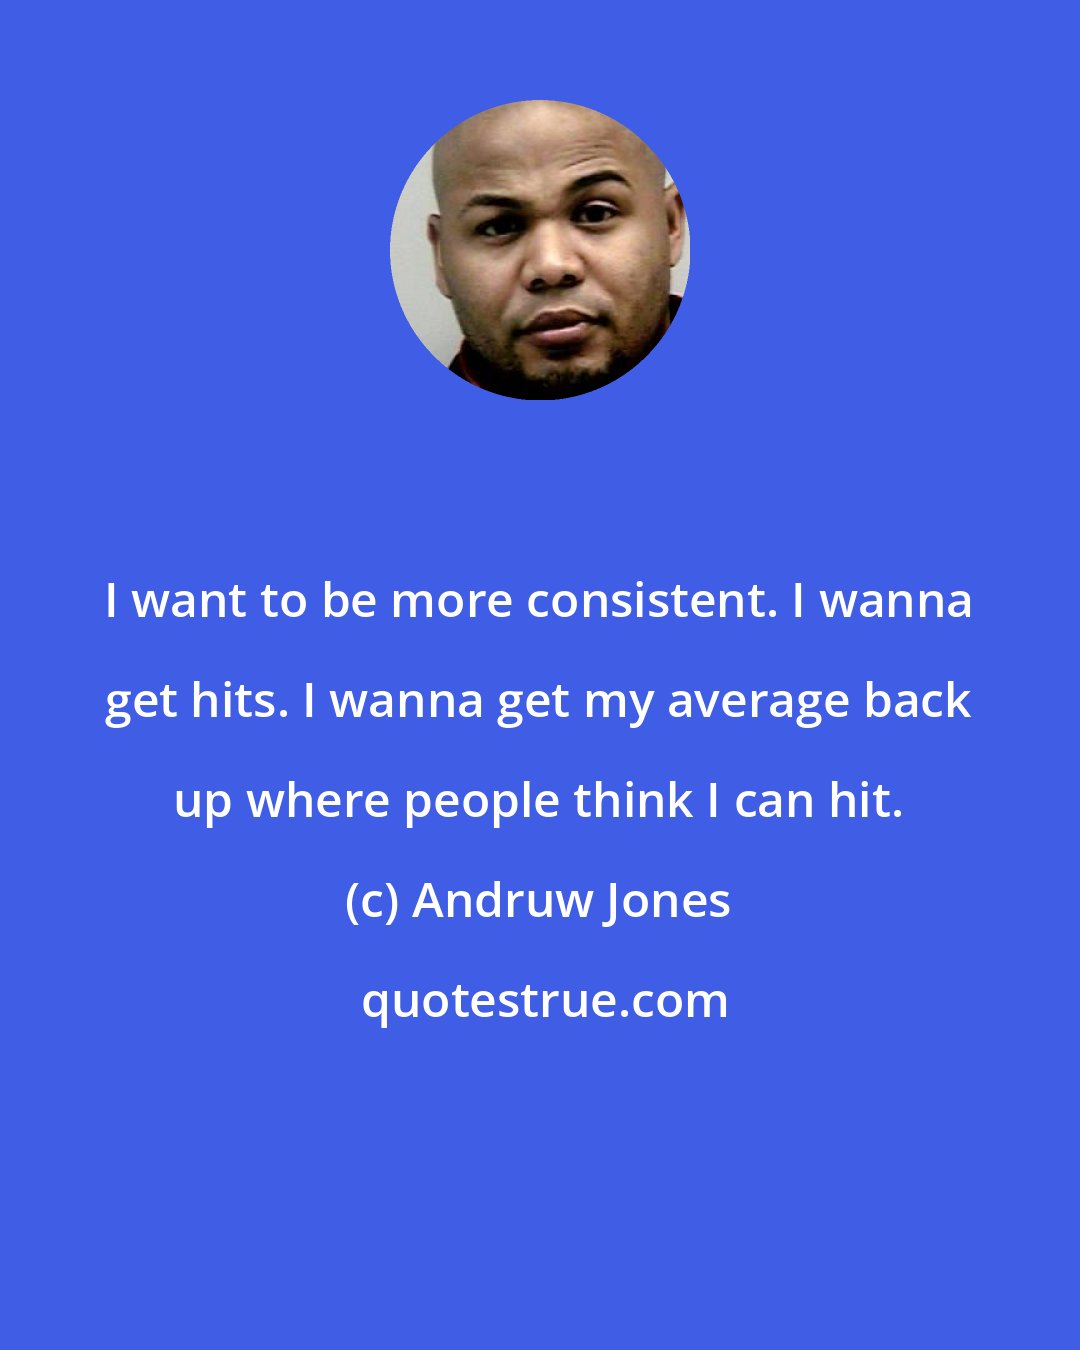 Andruw Jones: I want to be more consistent. I wanna get hits. I wanna get my average back up where people think I can hit.